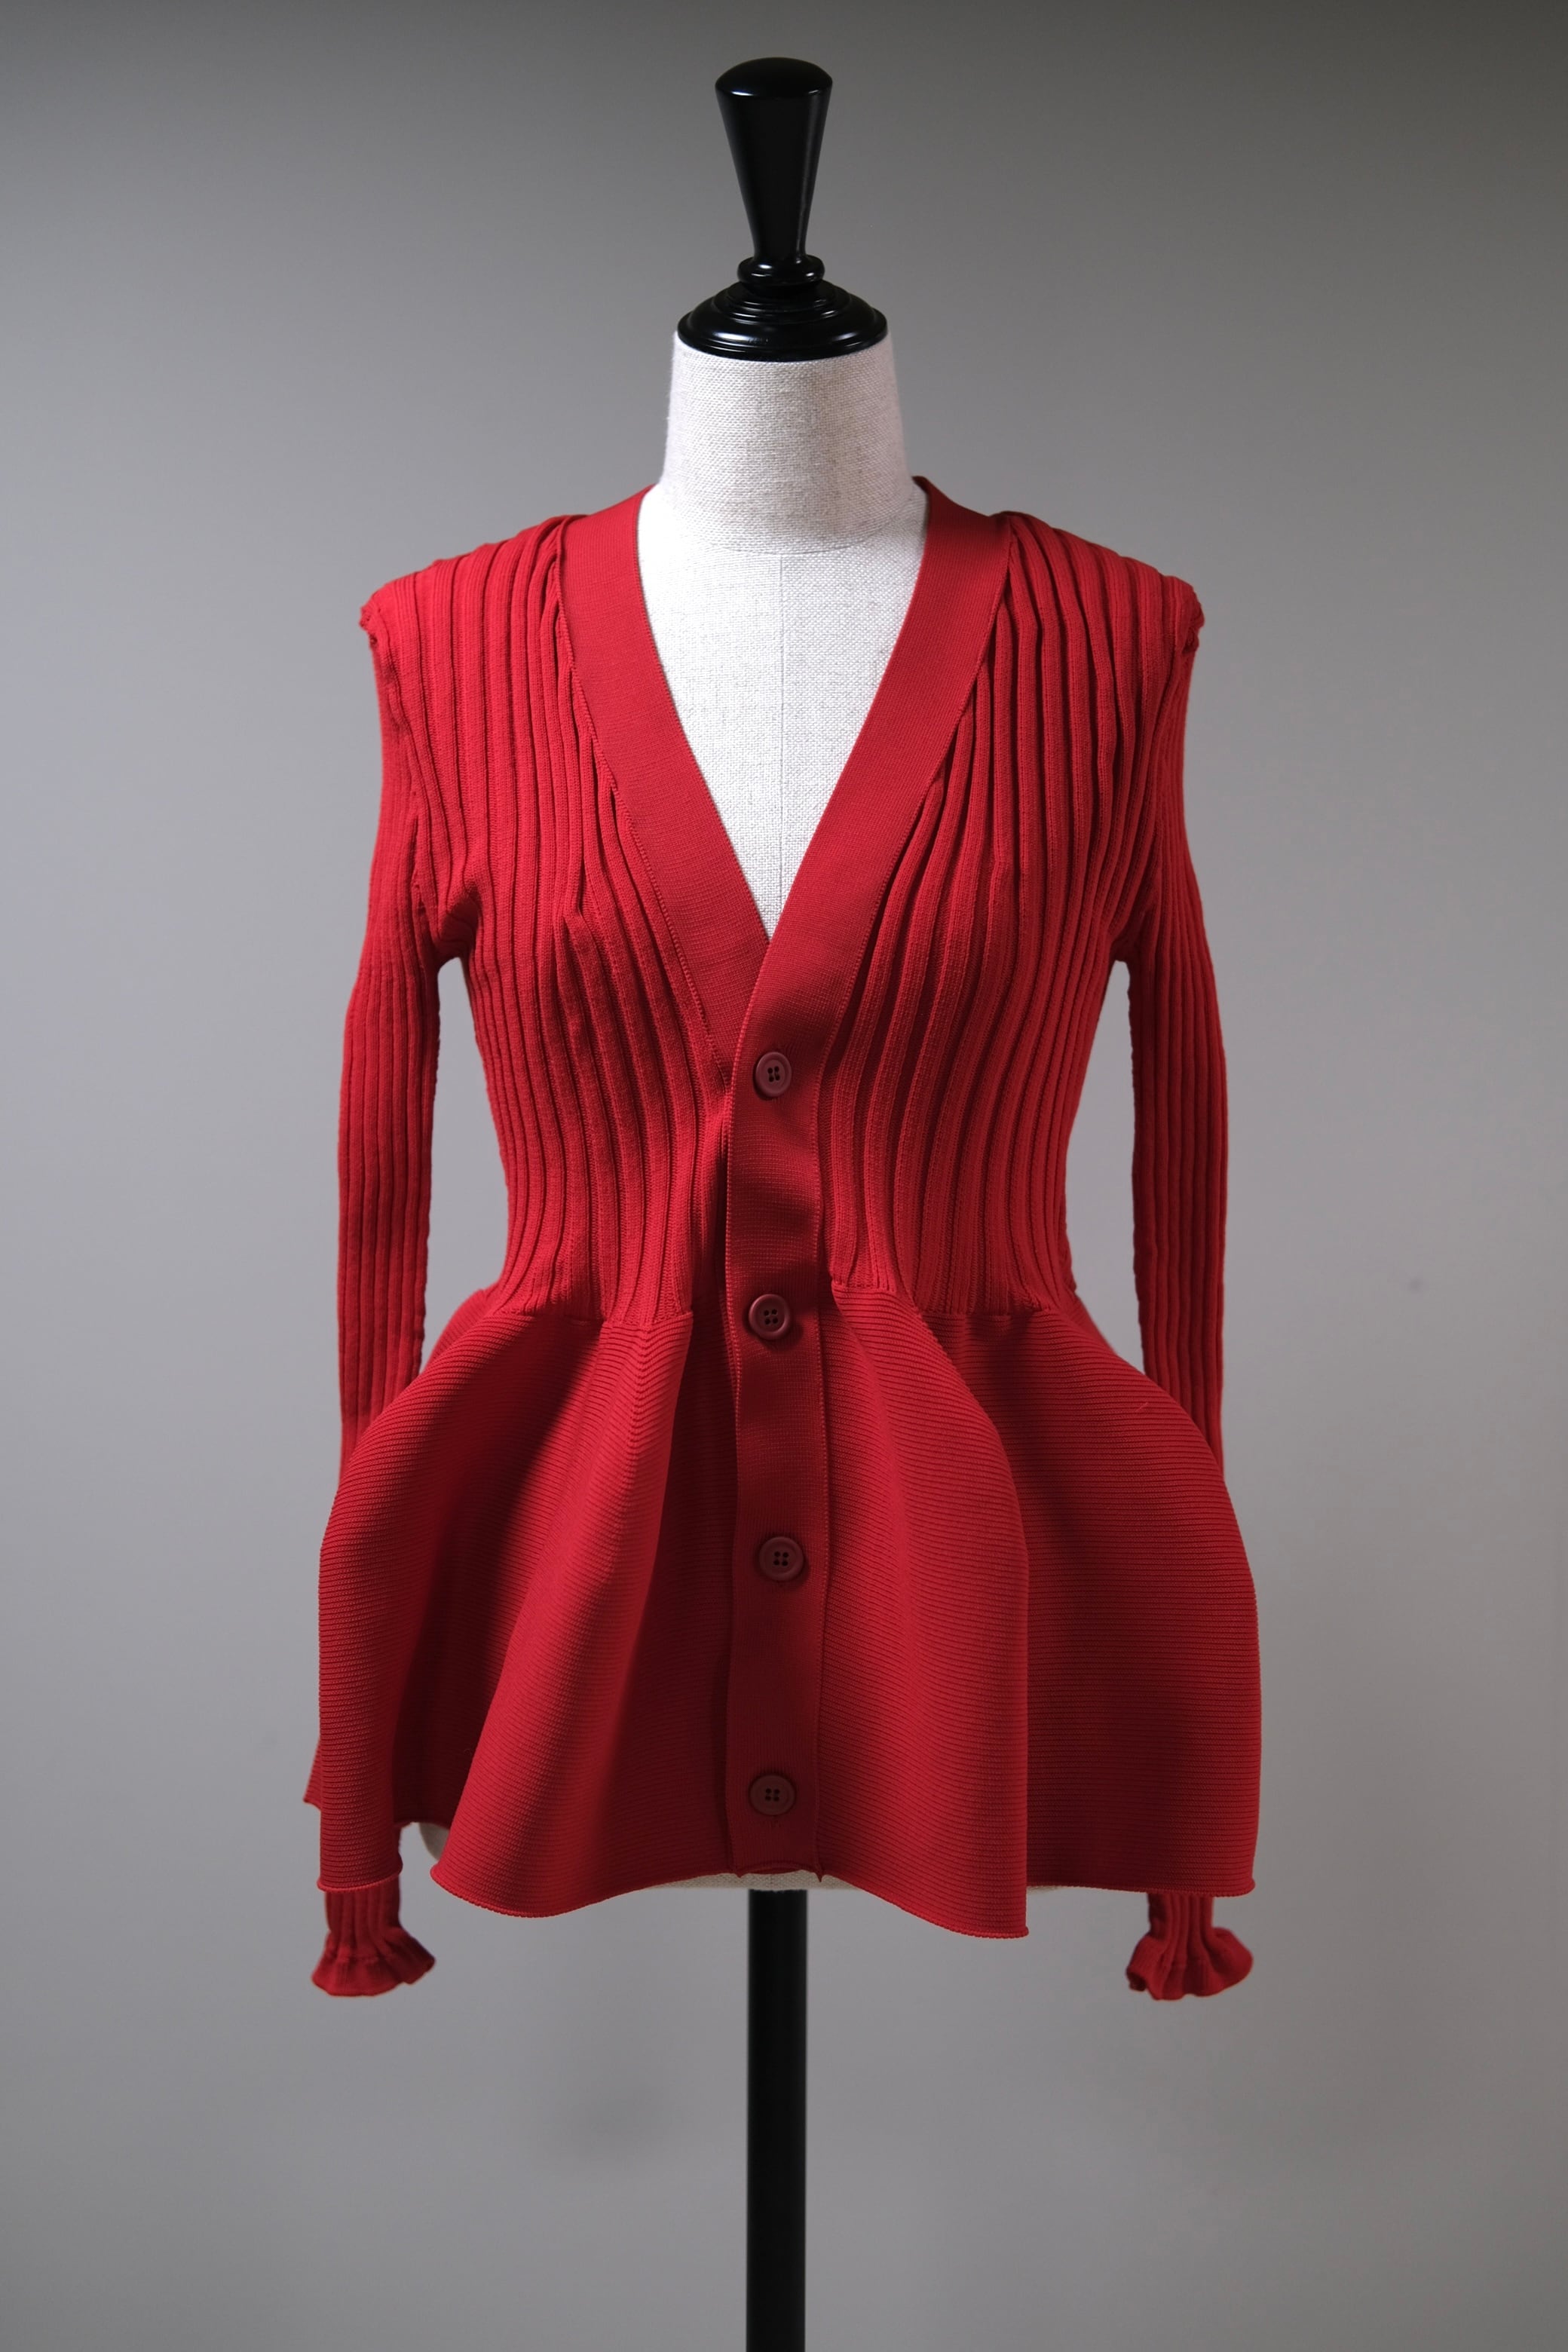 【CFCL】POTTERY CARDIGAN 1 - red | loop powered by BASE